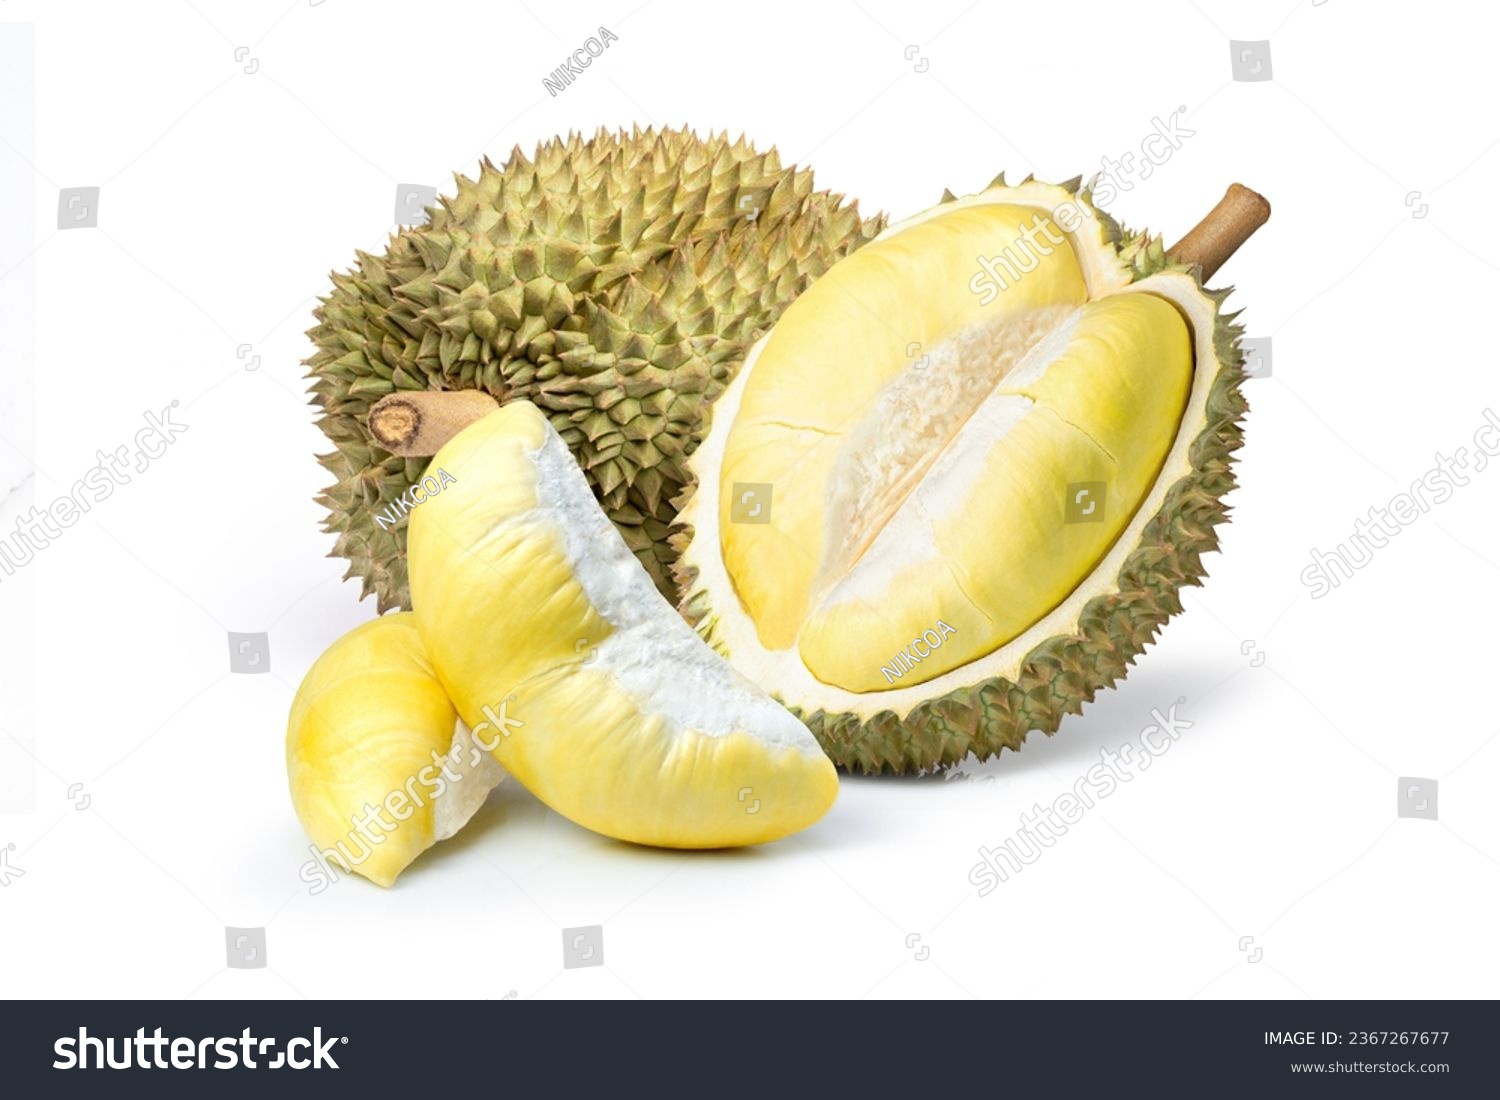 Durian fruit and ripe durian cut in half with pulp isolated on white background.  #2367267677